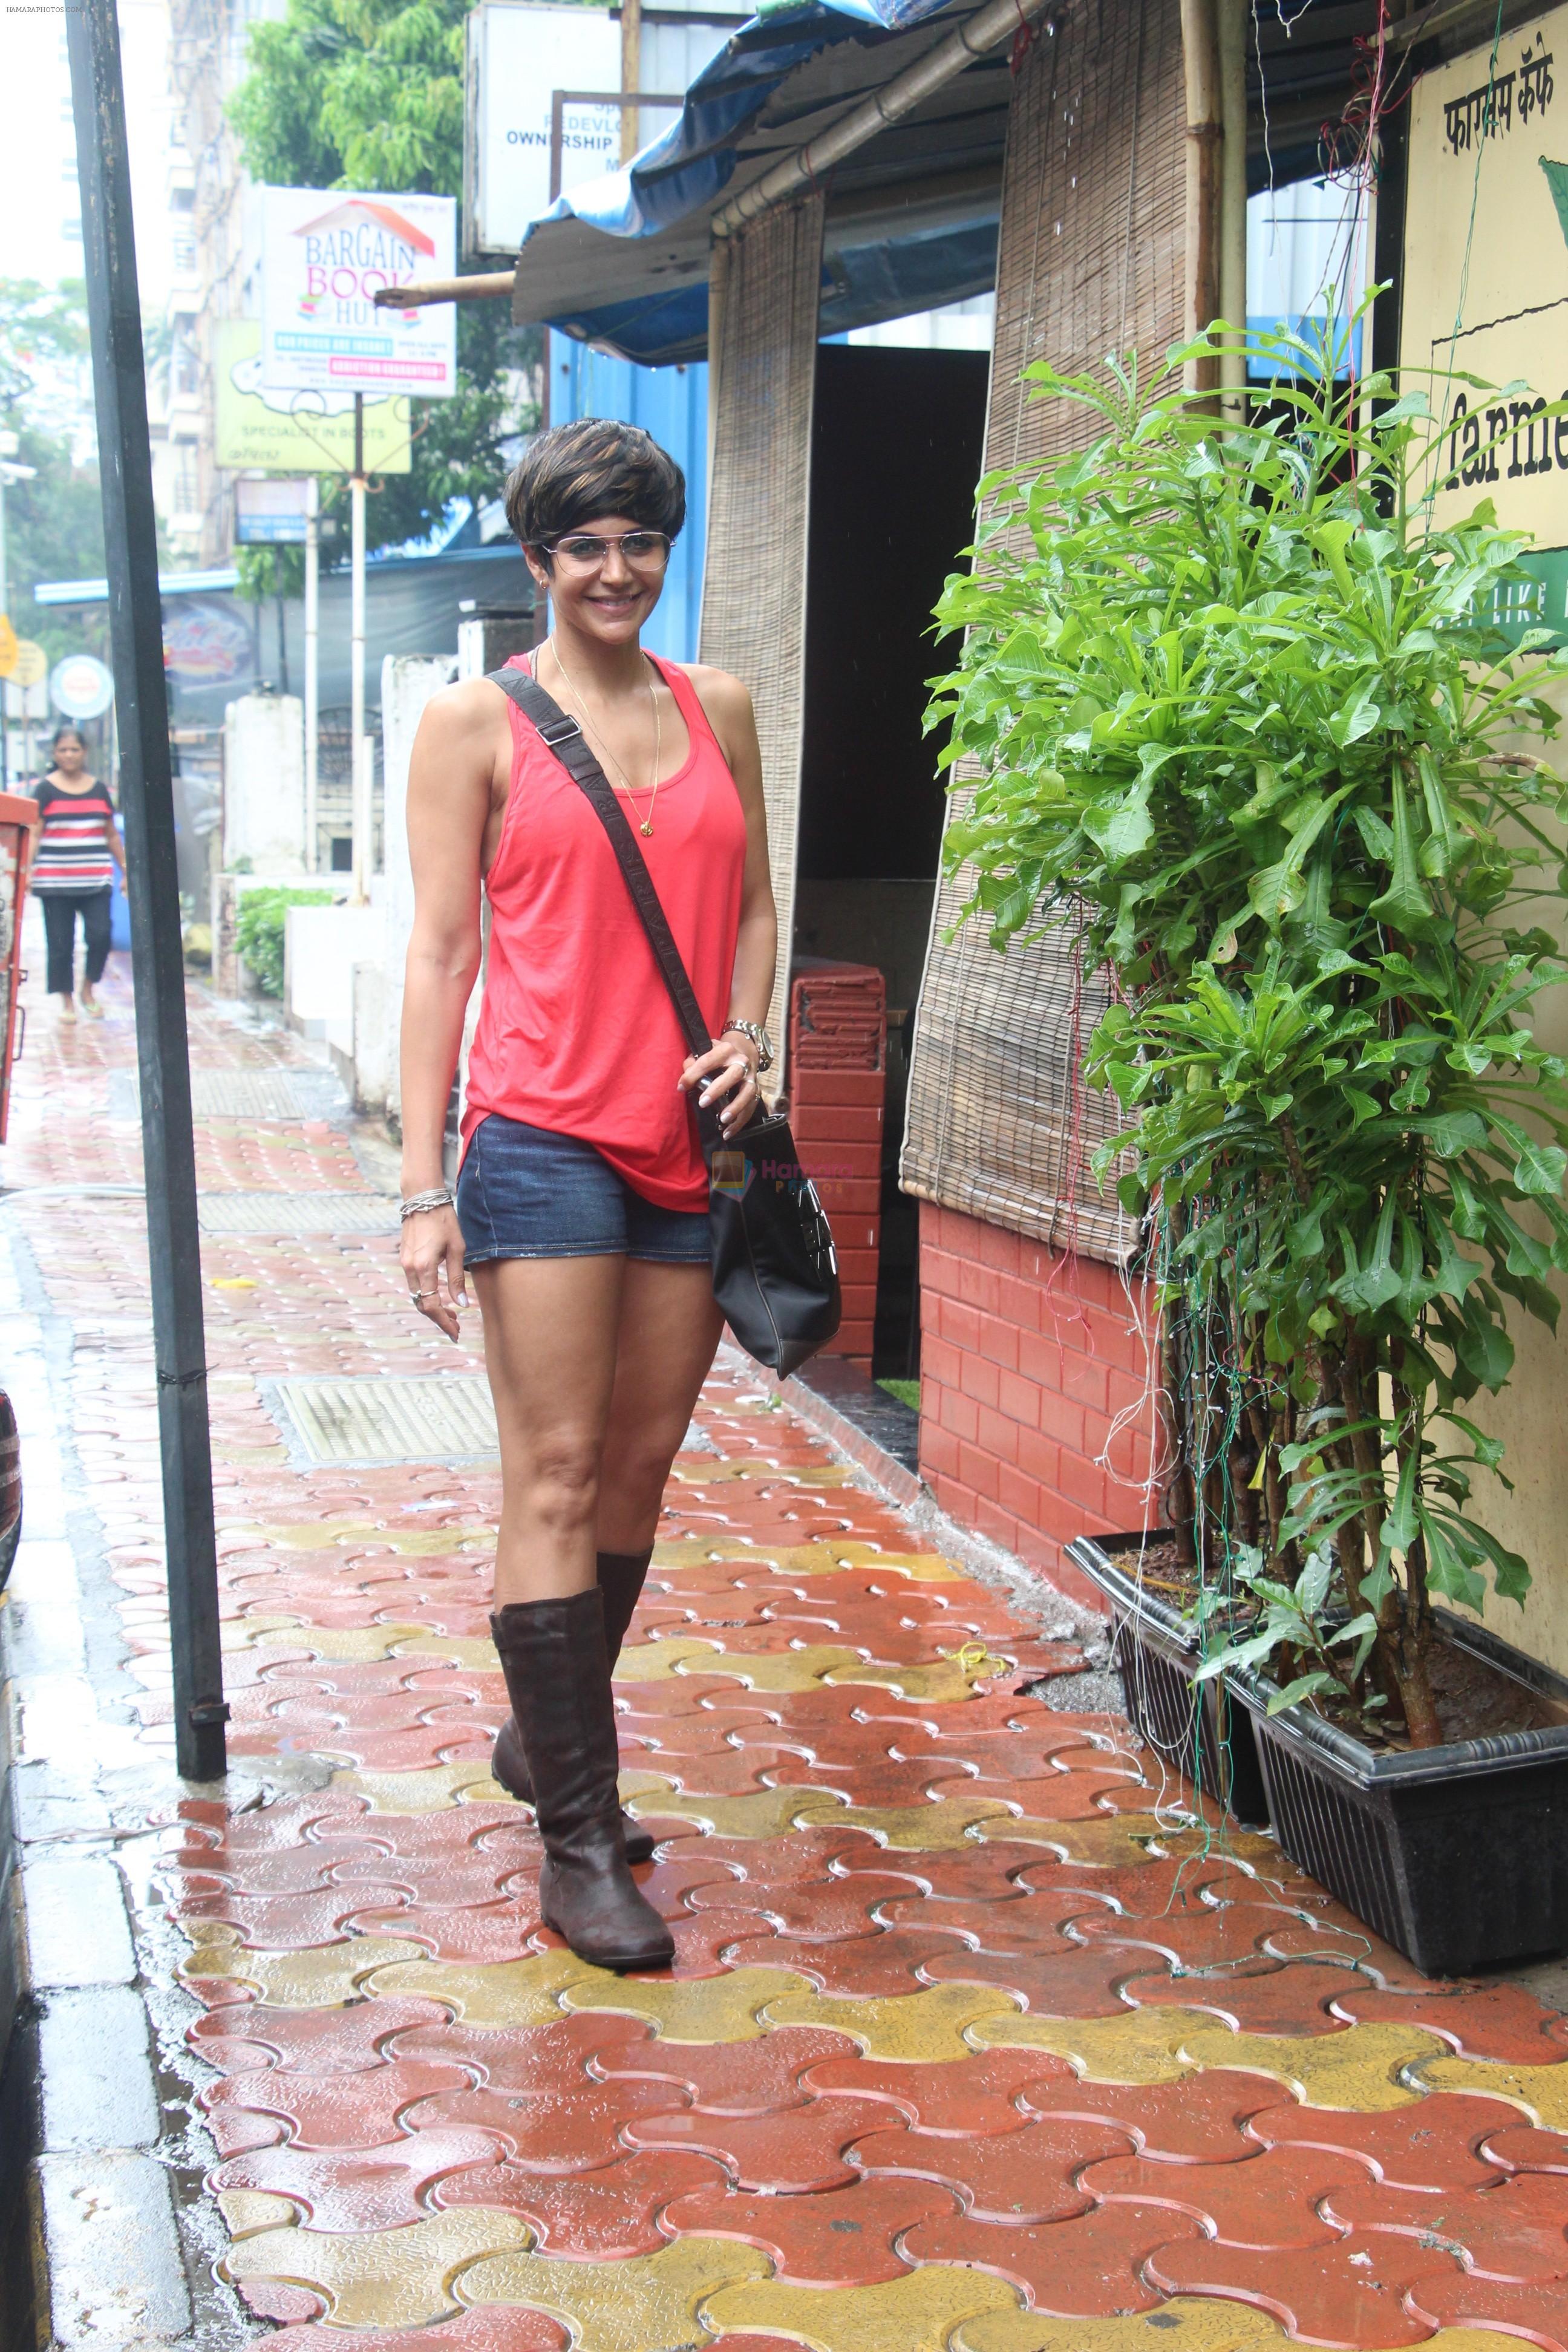 Mandira Bedi spotted at farmer's cafe in bandra on 2nd July 2019